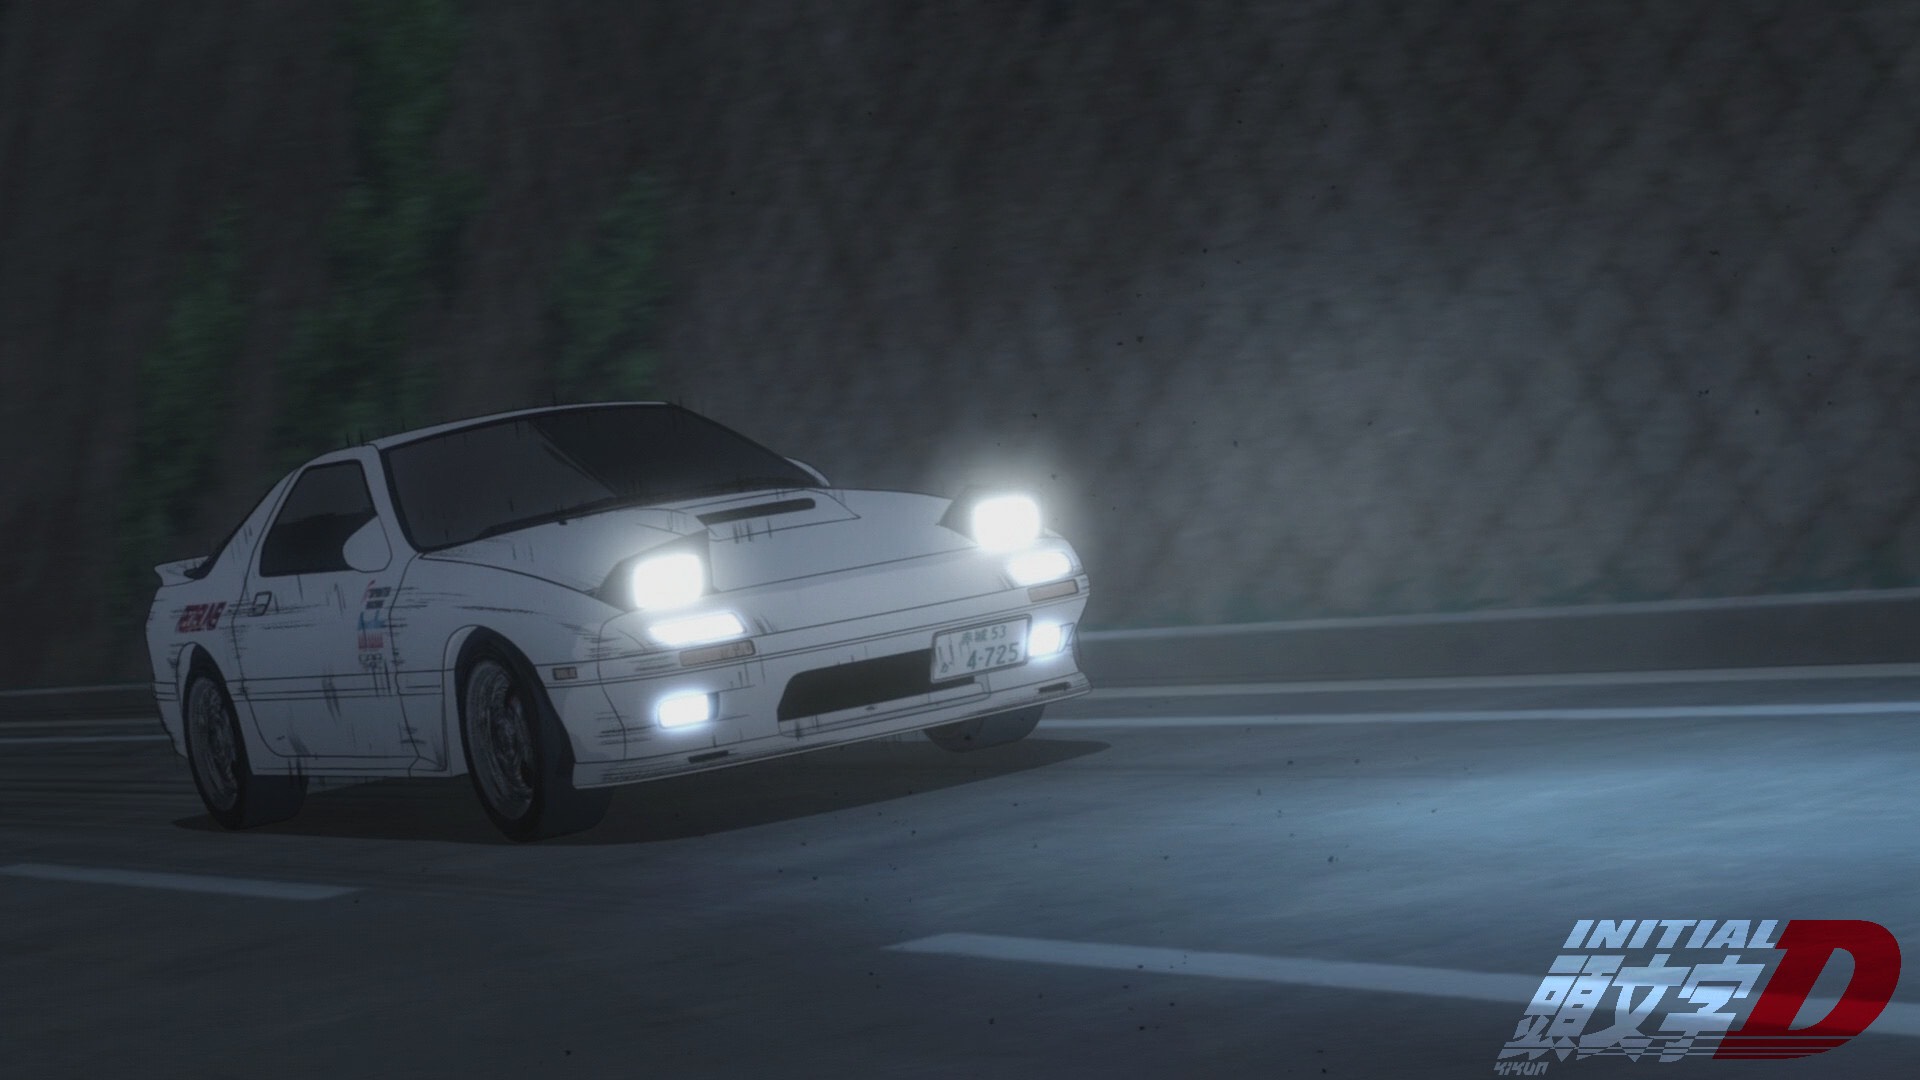 Free Download Initial D Rx7 Fc Wallpaper 19x1080 For Your Desktop Mobile Tablet Explore 45 Initial Wallpaper Initial Wallpaper Initial D Wallpapers Initial Wallpaper Pictures